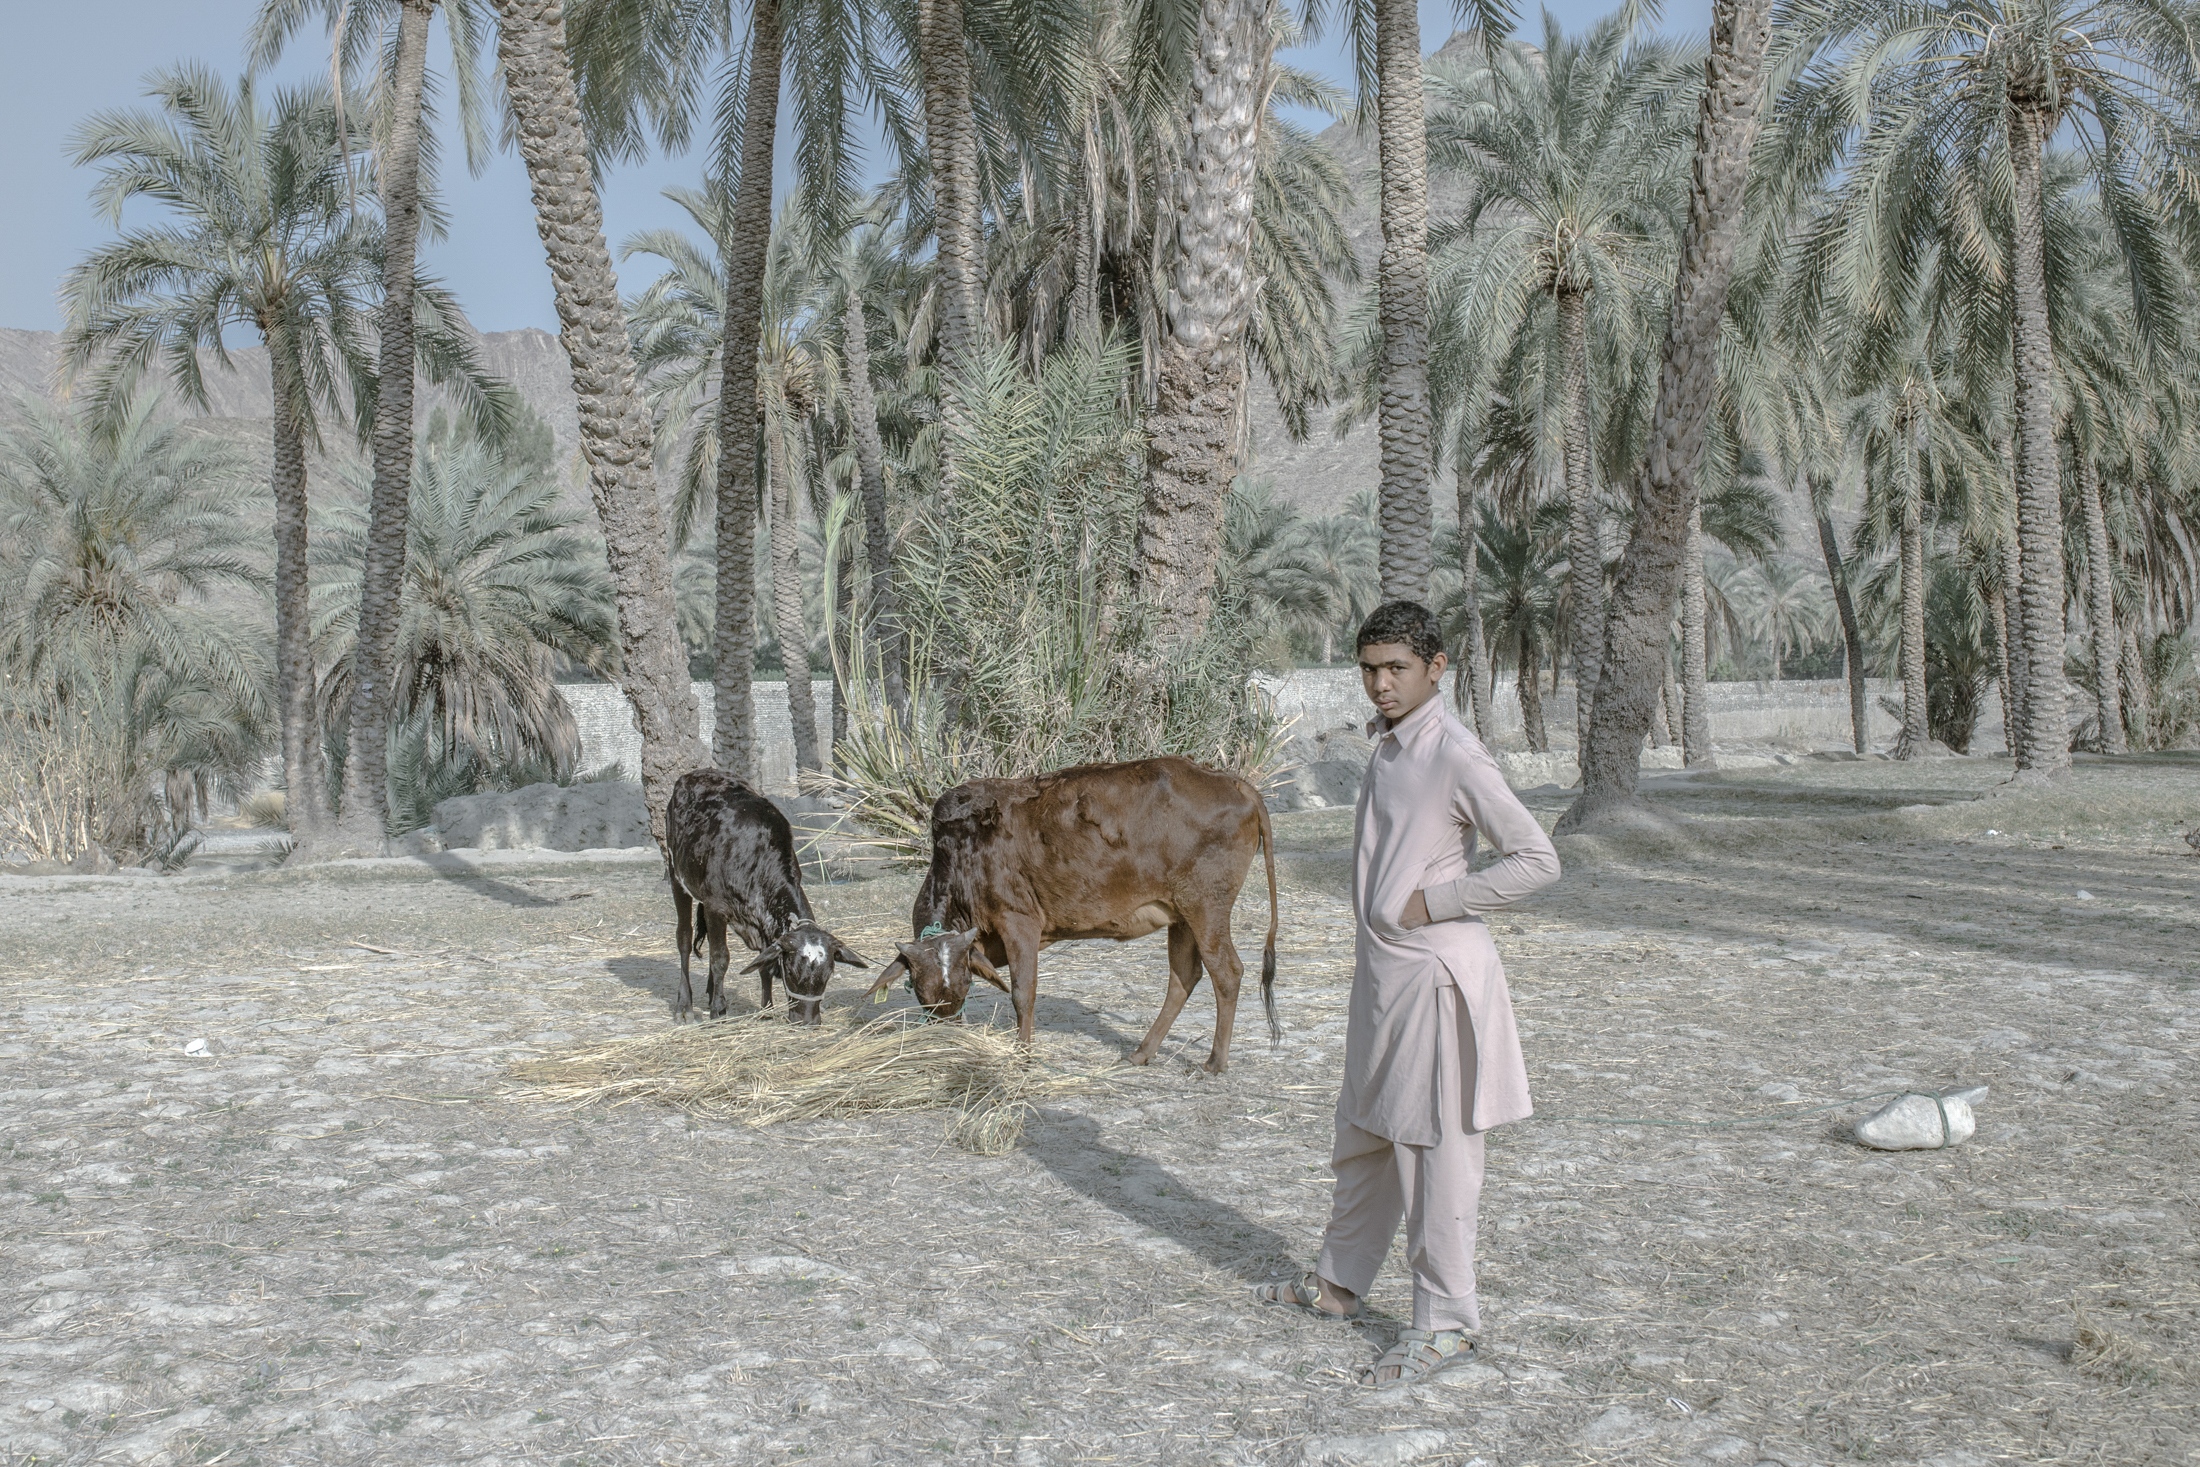 IN THE DESERT OF WETLANDS -   Hamid, 16, helps his father with animal husbandry. He...